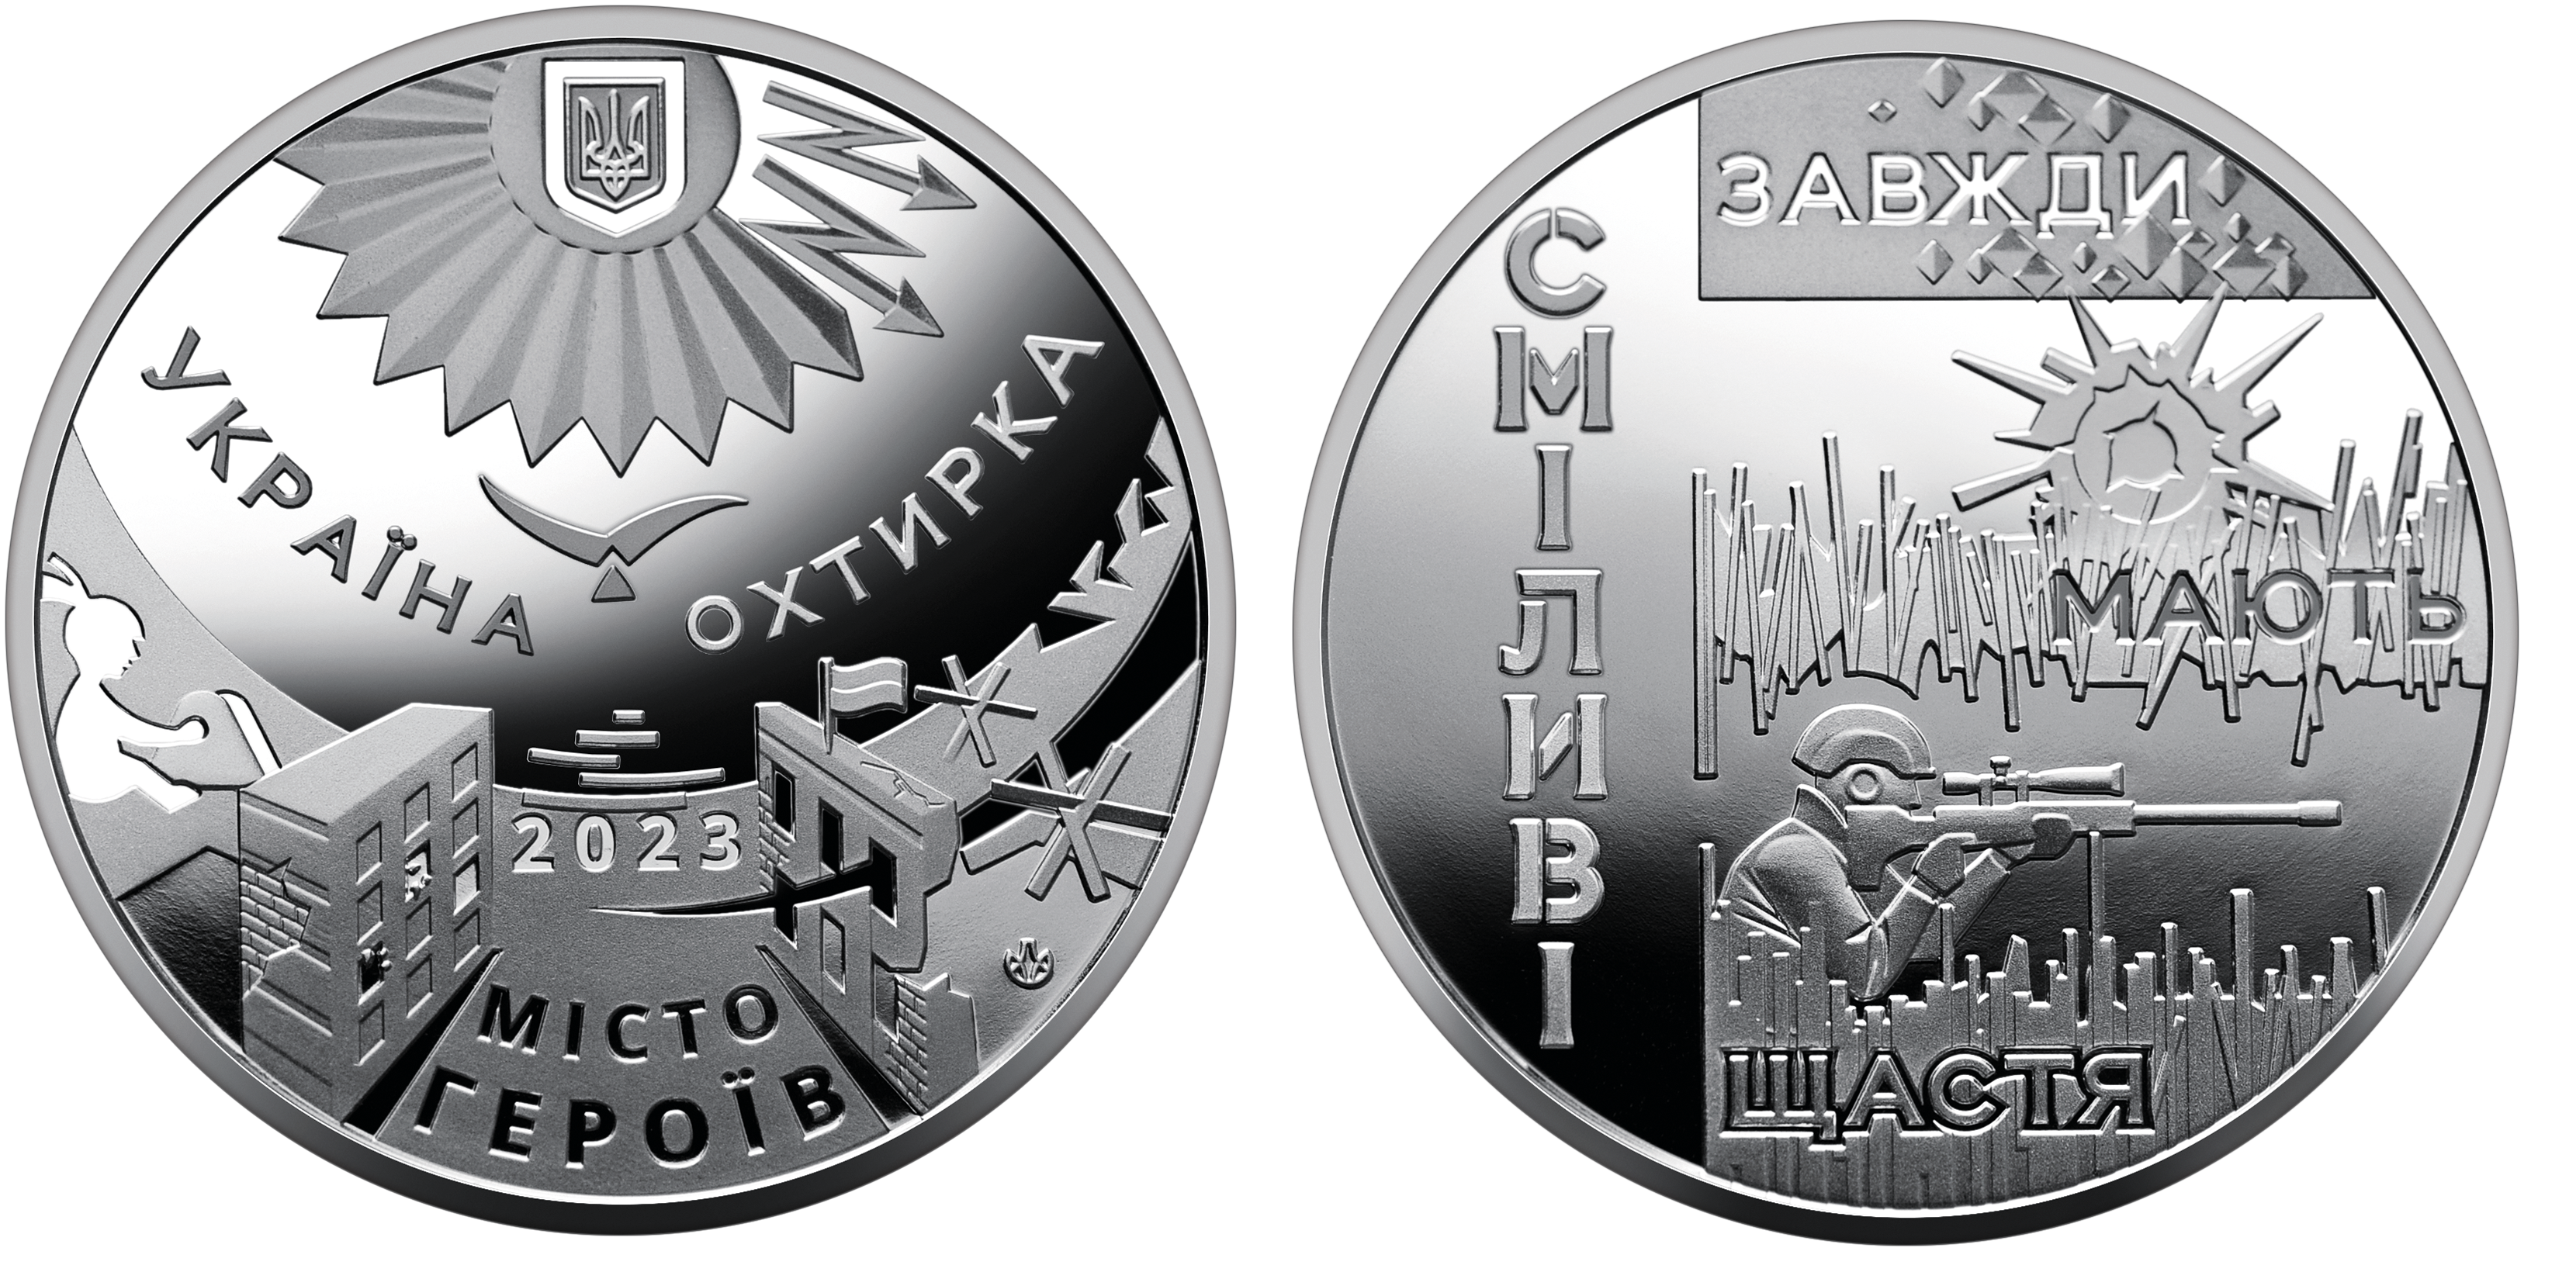 Sale of commemorative coins from MTB BANK • buy commemorative coins in Ukraine at MTB BANK - photo 12 - mtb.ua